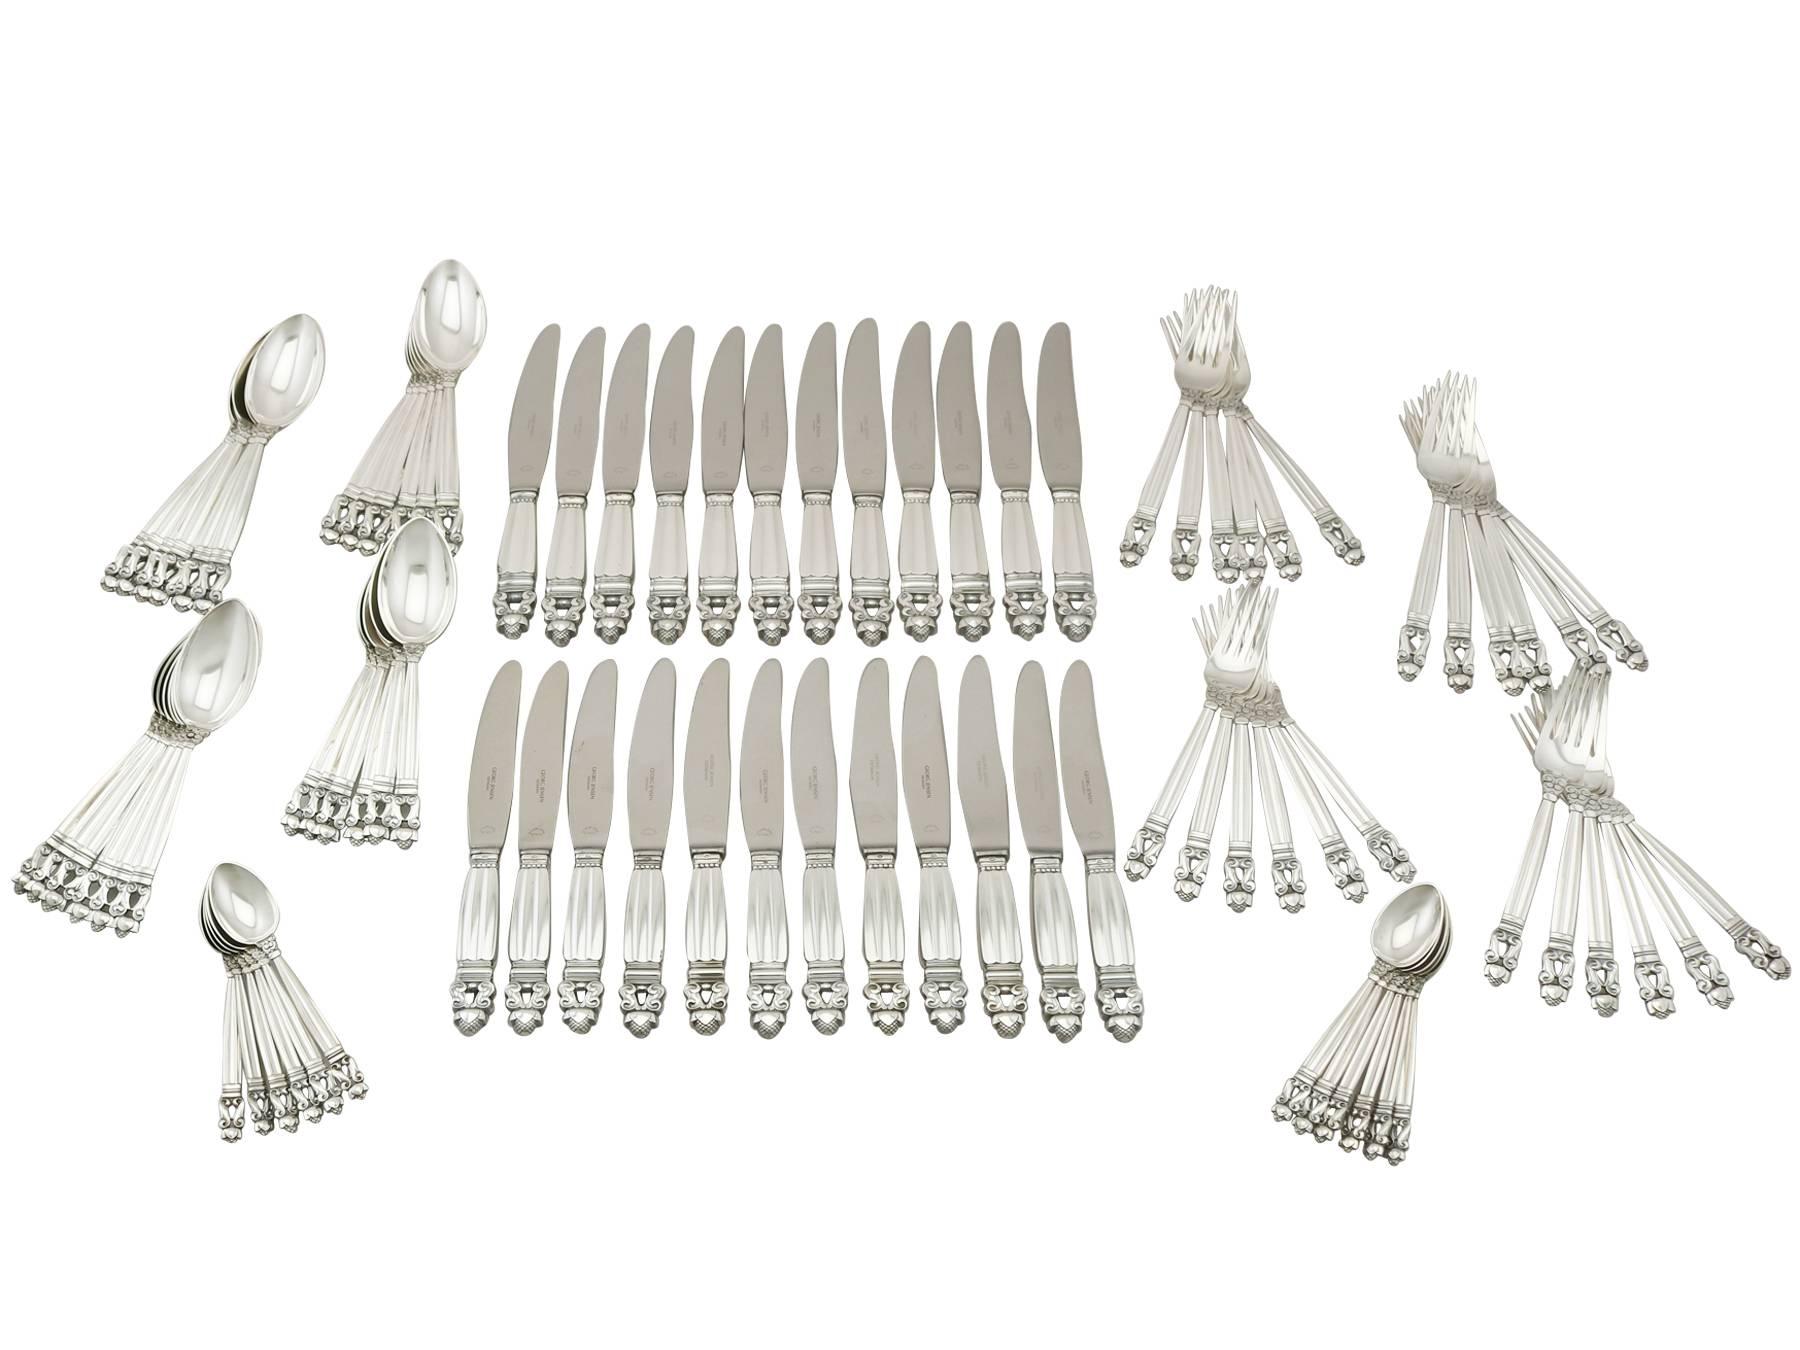 An exceptional, fine and impressive contemporary Danish sterling silver straight Acorn pattern flatware service for twelve persons, made by Georg Jensen; an addition to our canteen of cutlery collection

The pieces of this exceptional Danish